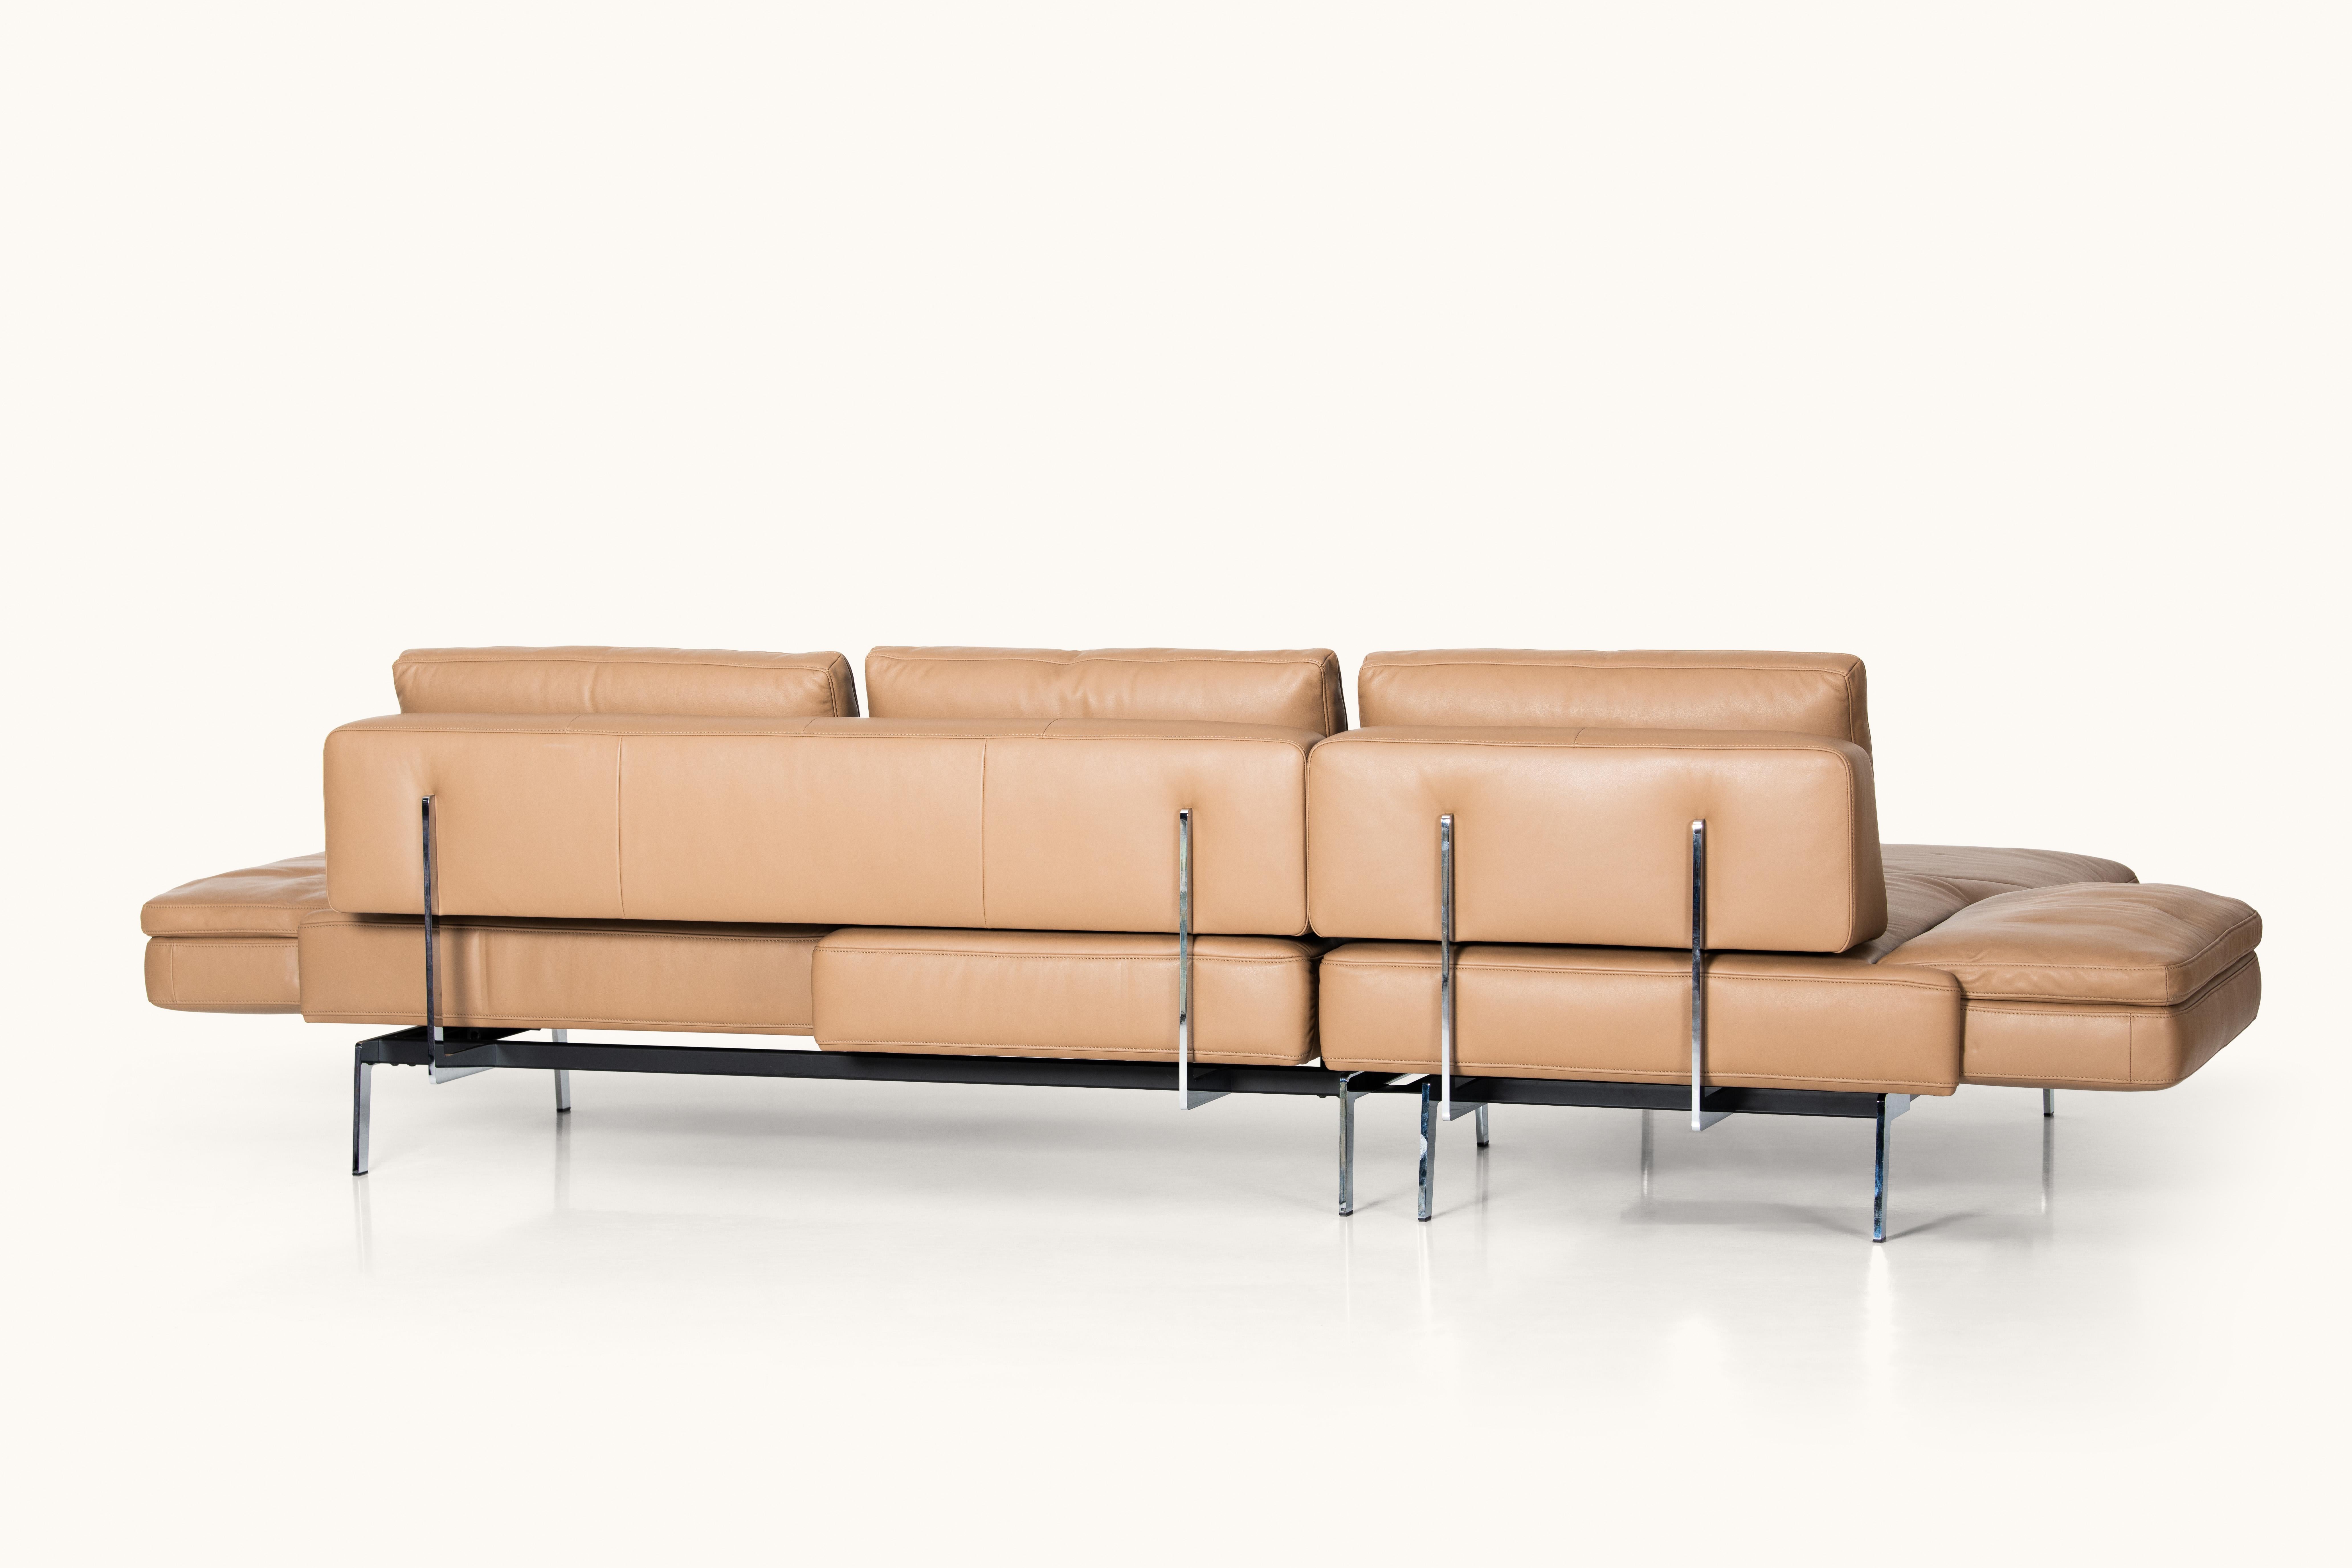 Modern DeSede DS-747/40 Multifunctional Sofa in Noce Leather Seat and Back Upholstery For Sale